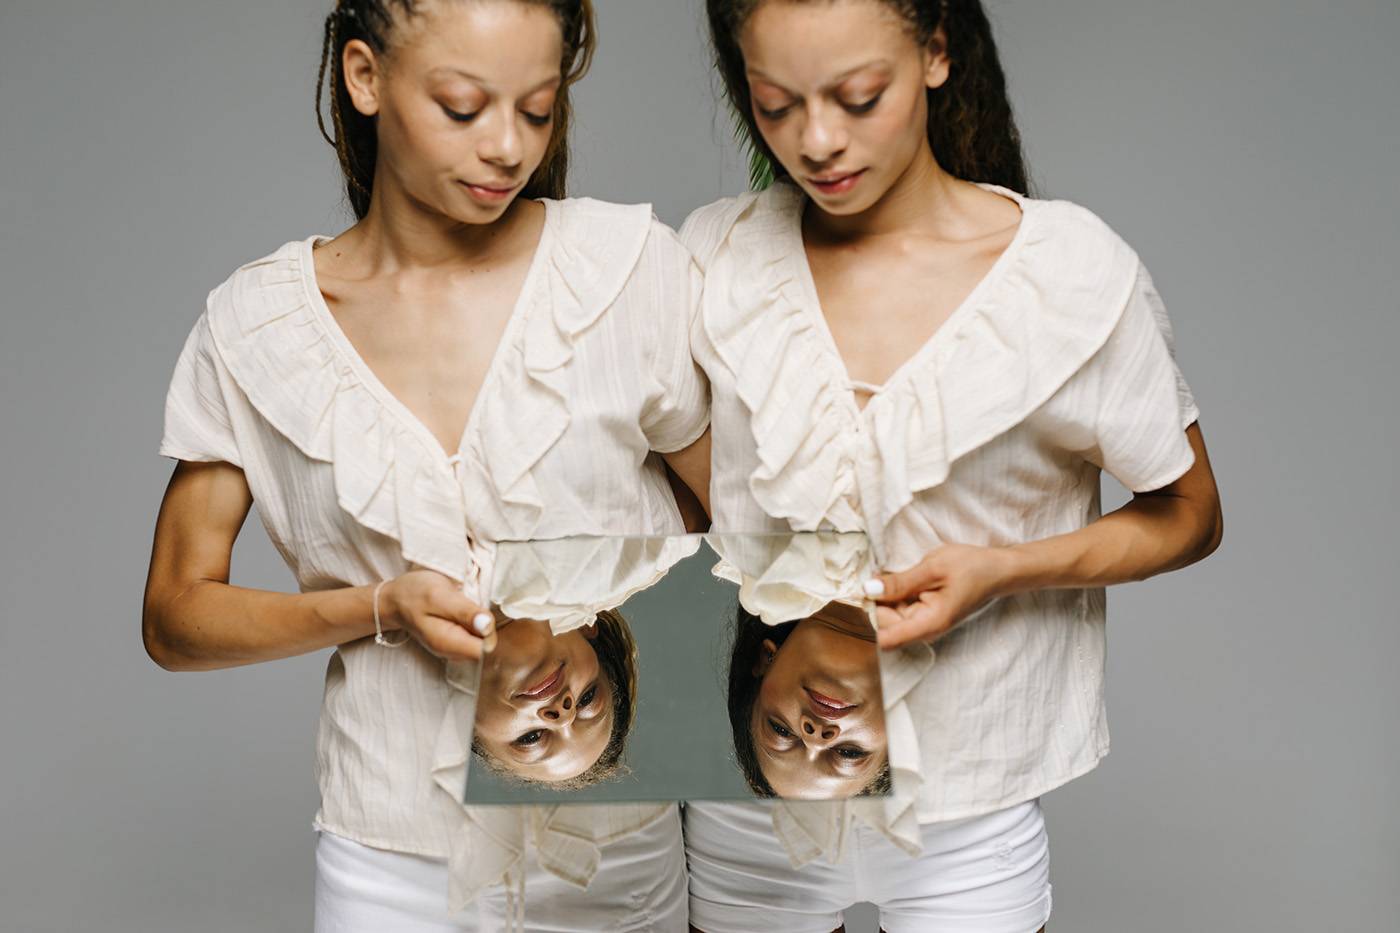 Two lovely young women in similar clothes†embracing each other and looking at reflection in mirror while standing on gray background